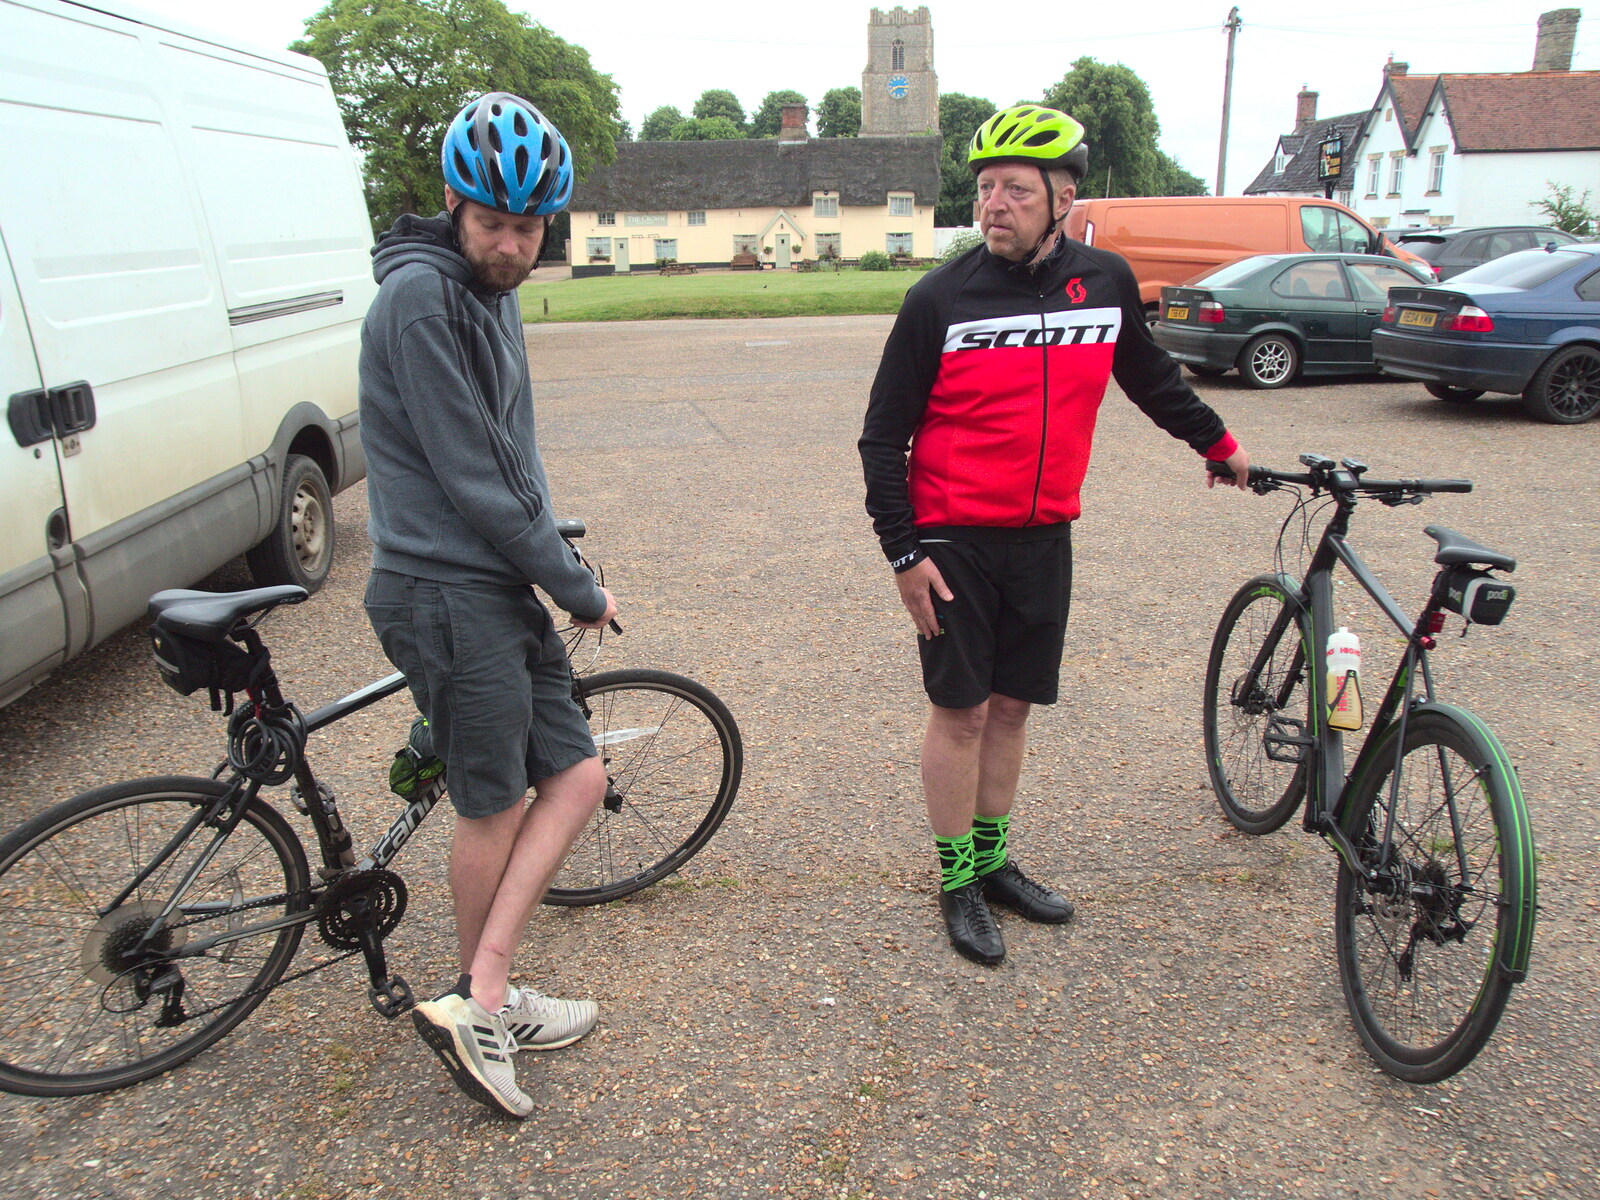 The Boy Phil and Gaz get ready to ride from A BSCC Ride to Pulham Market, Norfolk - 17th June 2021